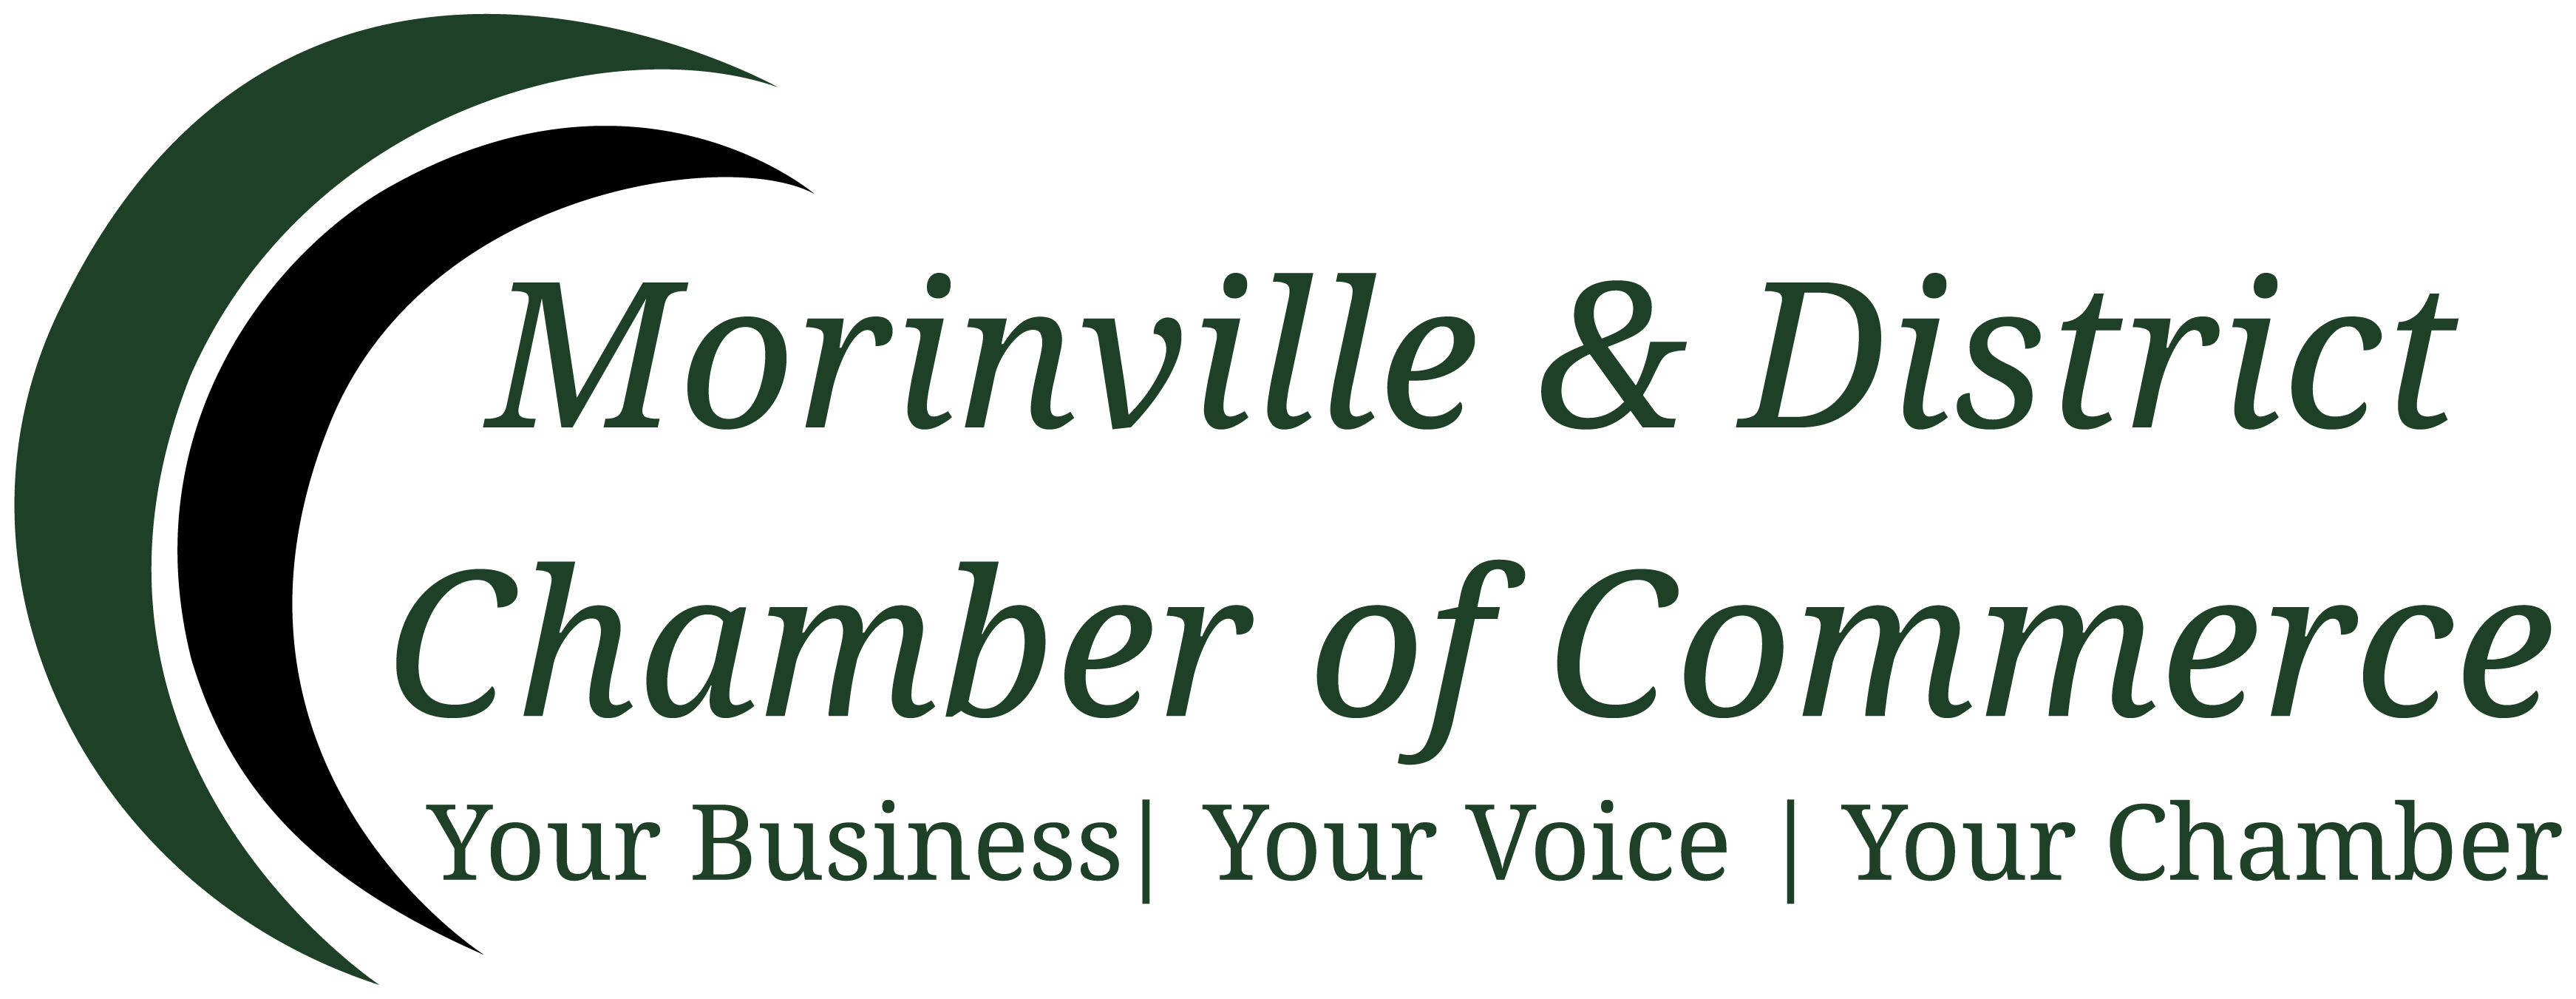 Proud Member of the Morinville & District Chamber of Commerce